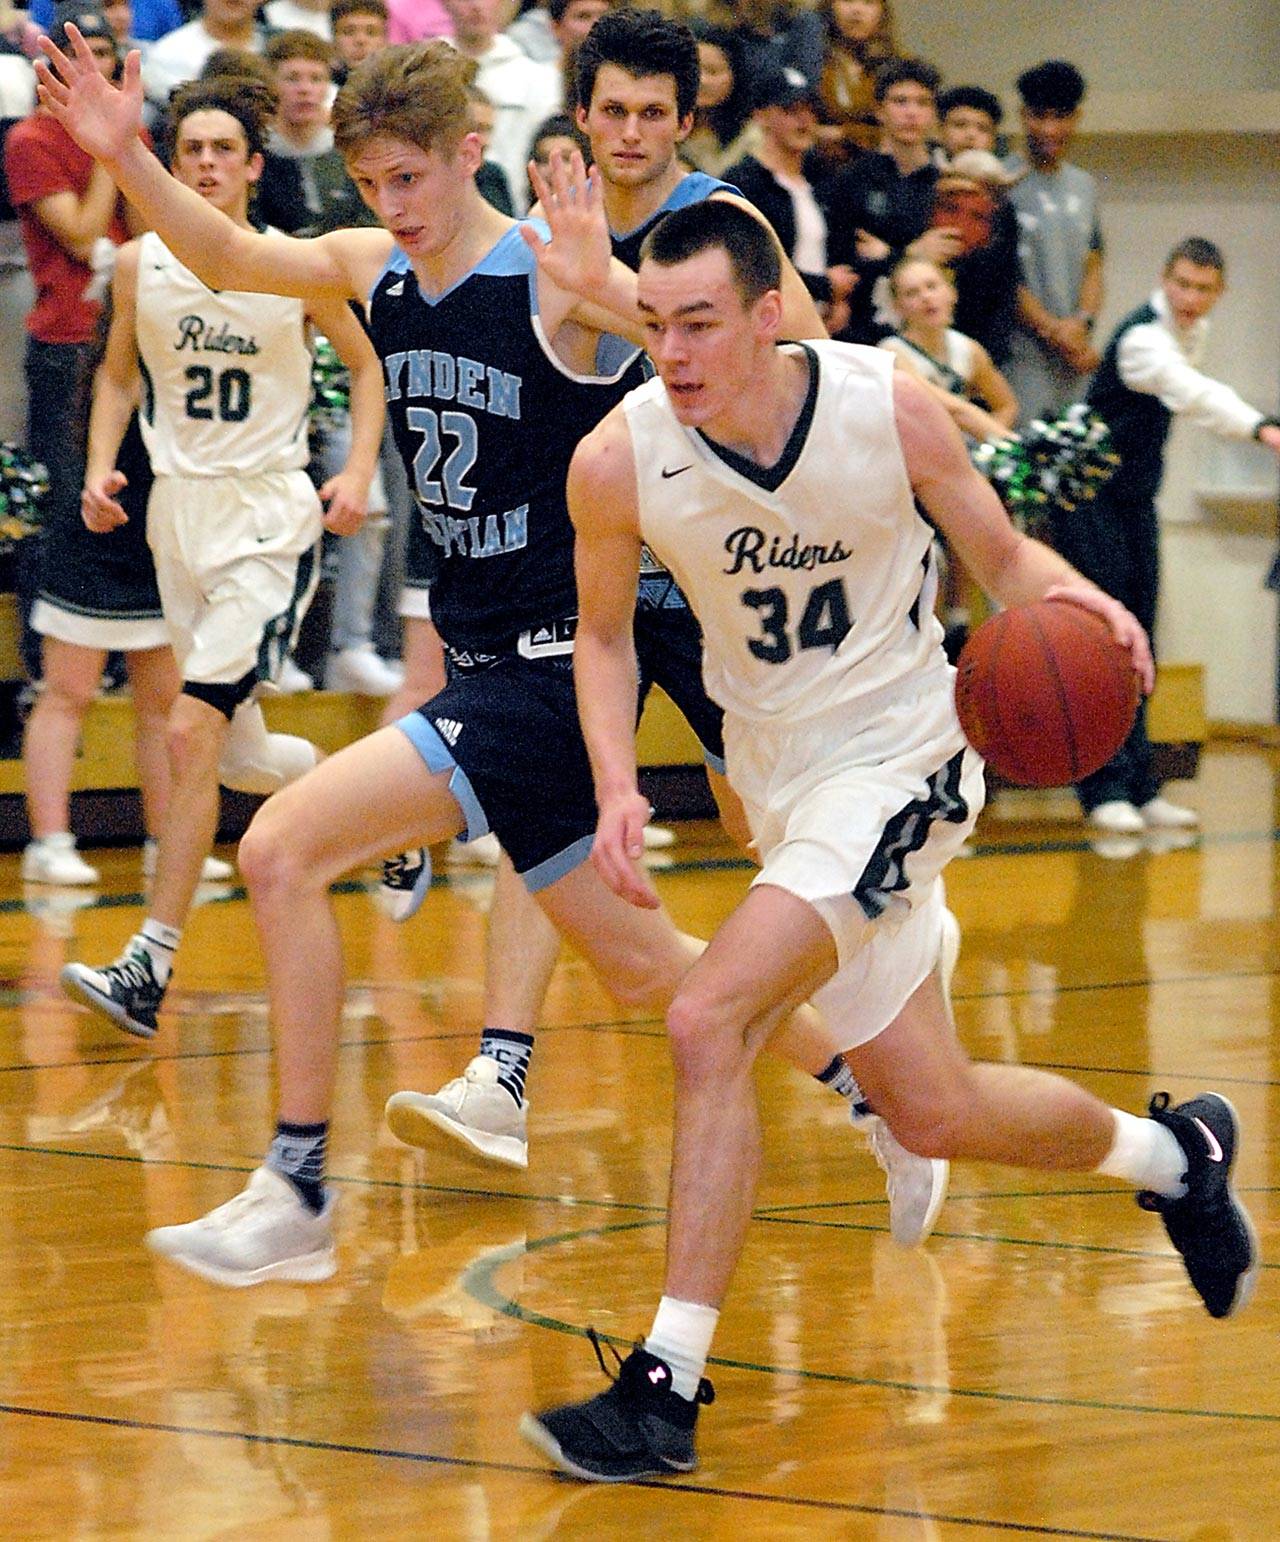 Port Angeles’ Liam Clark, right, races down court as Lynden Christian’s Cole Bajema keeps pace Saturday evening at Port Angeles High School. Lynden Christian, the defending state 1A champion and the No. 1-ranked 1A team in the state, won 64-50. The Roughriders are back in action at home at 7:15 p.m. Tuesday against Sequim, with the girls’ PA-Sequim game beginning at 5:45 p.m. (Keith Thorpe/Peninsula Daily News)